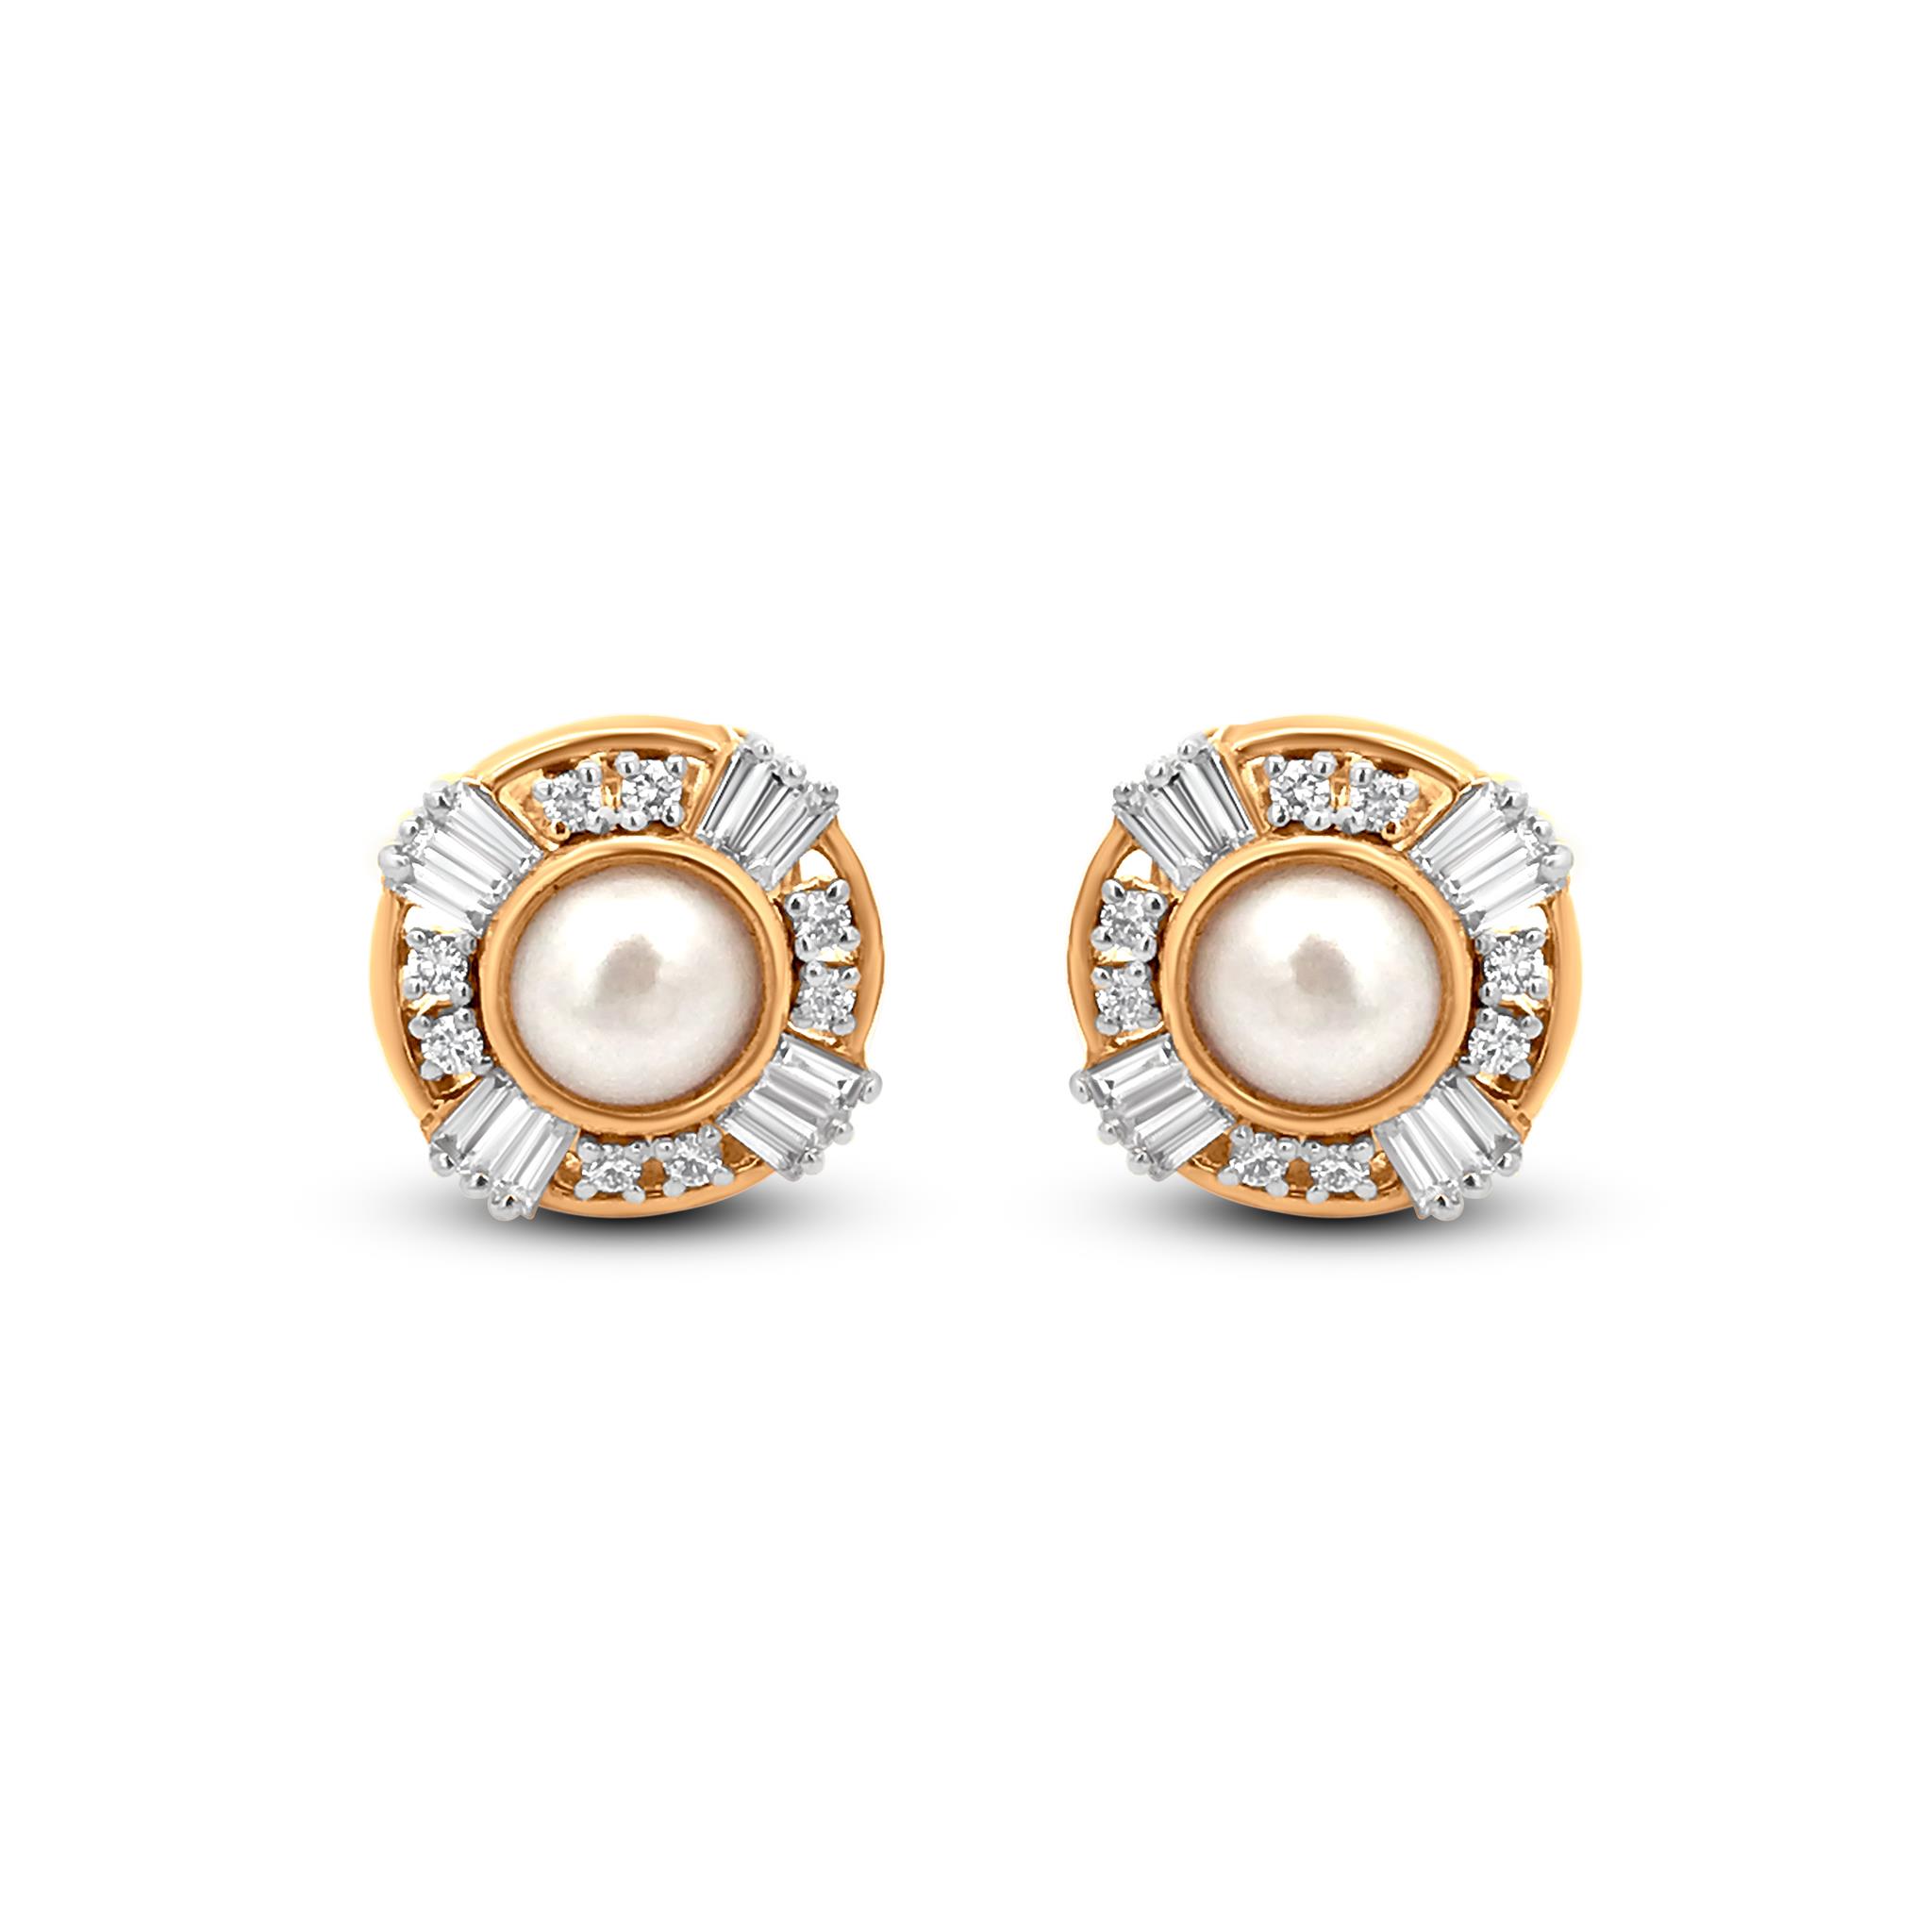 18K Yellow Gold South Sea Cultured 8 -9mm Pearl Stud Earrings